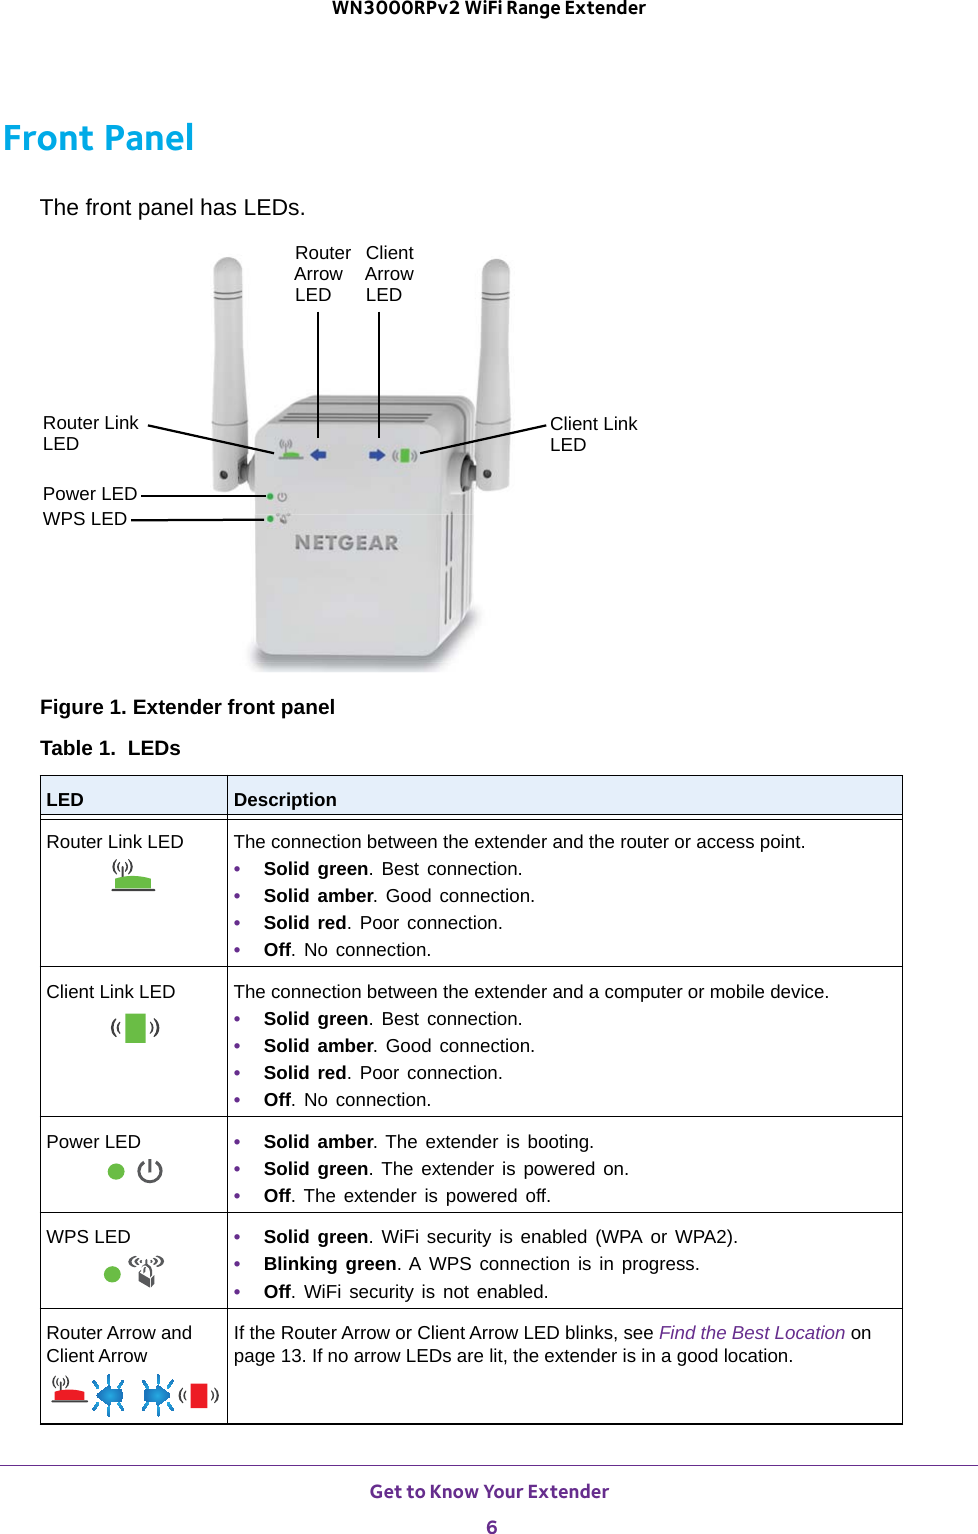 Get to Know Your Extender 6WN3000RPv2 WiFi Range Extender Front PanelThe front panel has LEDs. ClientRouterPower LEDWPS LEDArrowLED ArrowLEDRouter Link Client LinkLED LEDFigure 1. Extender front panelTable 1.  LEDsLED DescriptionRouter Link LED The connection between the extender and the router or access point.•  Solid green. Best connection.•  Solid amber. Good connection.•  Solid red. Poor connection.•  Off. No connection.Client Link LED The connection between the extender and a computer or mobile device.•  Solid green. Best connection.•  Solid amber. Good connection.•  Solid red. Poor connection.•  Off. No connection.Power LED •  Solid amber. The extender is booting.•  Solid green. The extender is powered on.•  Off. The extender is powered off.WPS LED •  Solid green. WiFi security is enabled (WPA or WPA2).•  Blinking green. A WPS connection is in progress.•  Off. WiFi security is not enabled.Router Arrow and Client ArrowIf the Router Arrow or Client Arrow LED blinks, see Find the Best Location on page  13. If no arrow LEDs are lit, the extender is in a good location.